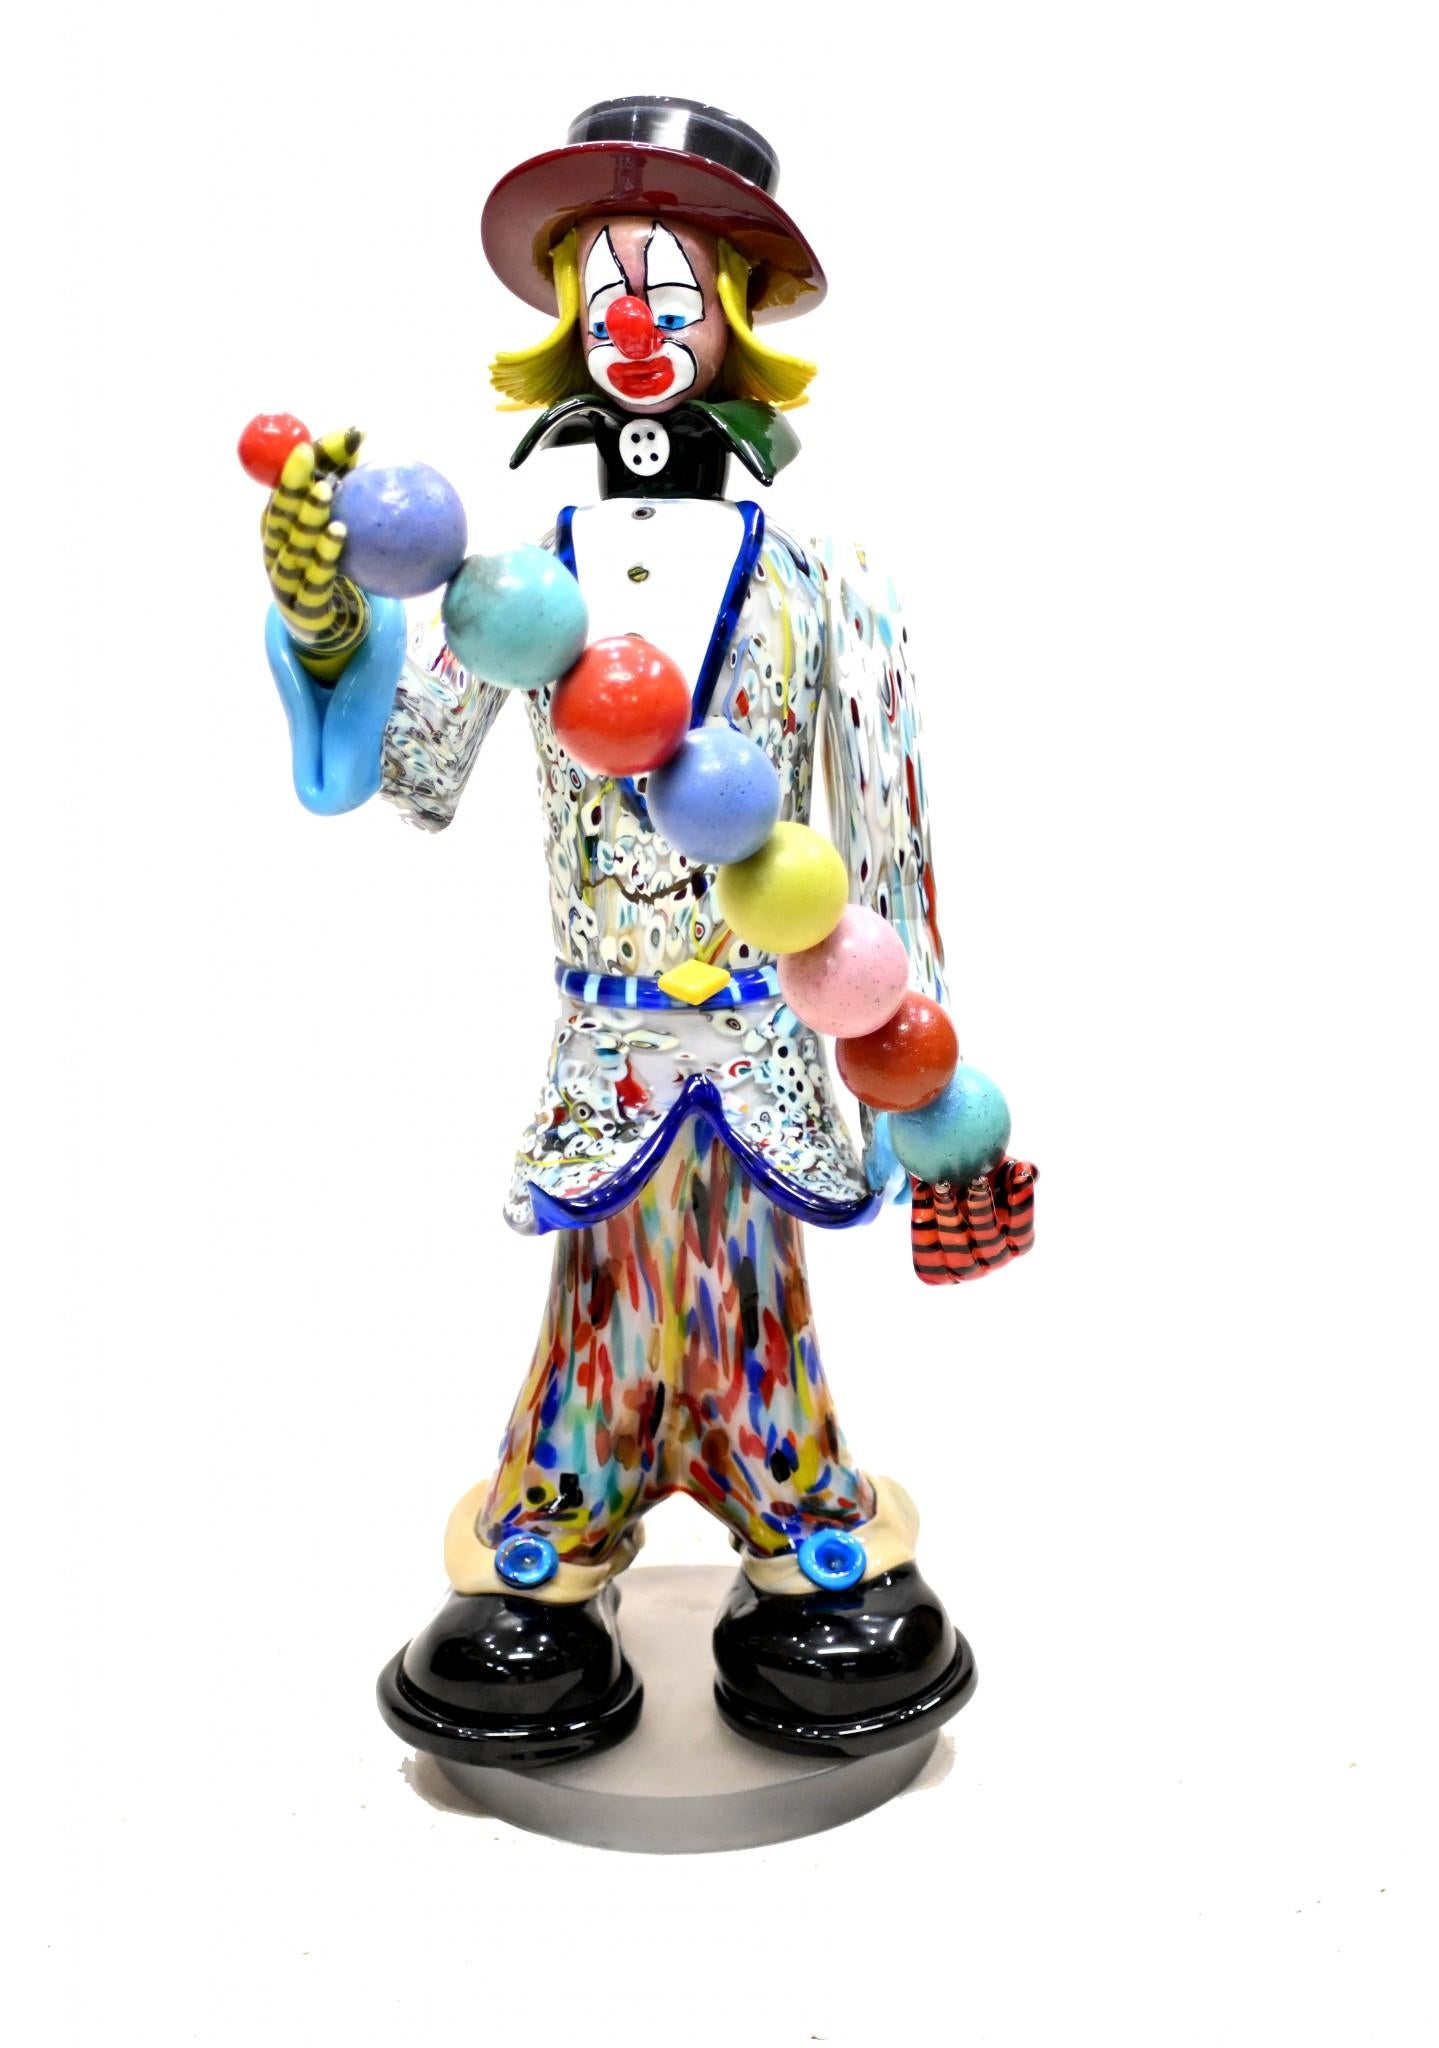 You are viewing a unique Italian Murano glass clown Standing at almost four feet tall - 109 CM - this really is a big piece Such a characterful piece with vivid colours and the juggling balls The effects - smearing, smudging - of the glass